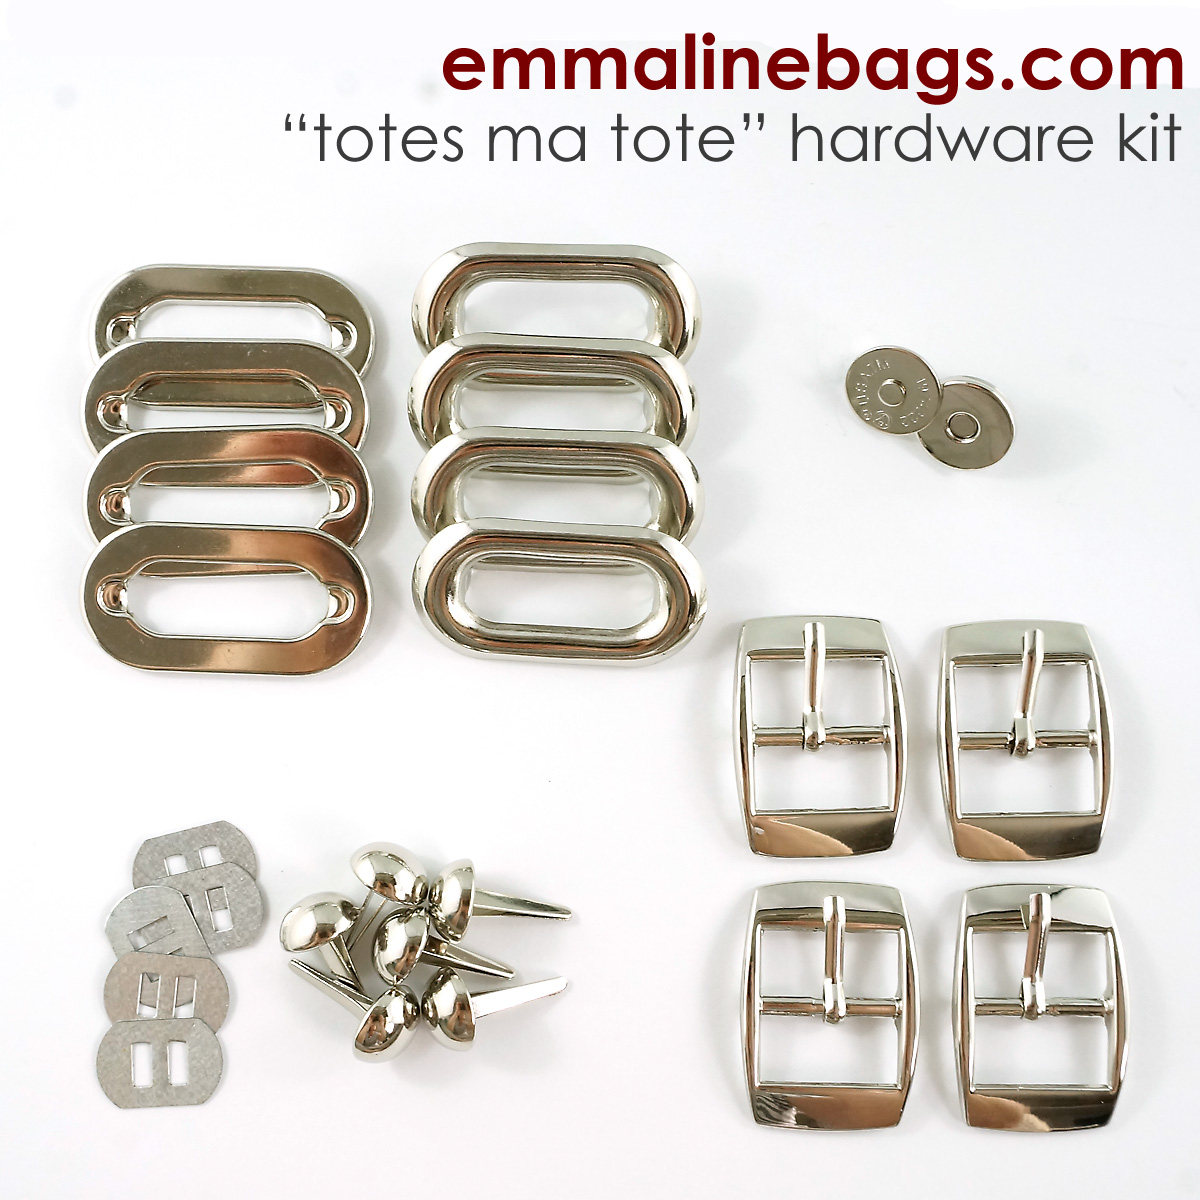 Emmaline Bags: Sewing Patterns and Purse Supplies: The Totes Ma Tote Bag: A New Cover Look